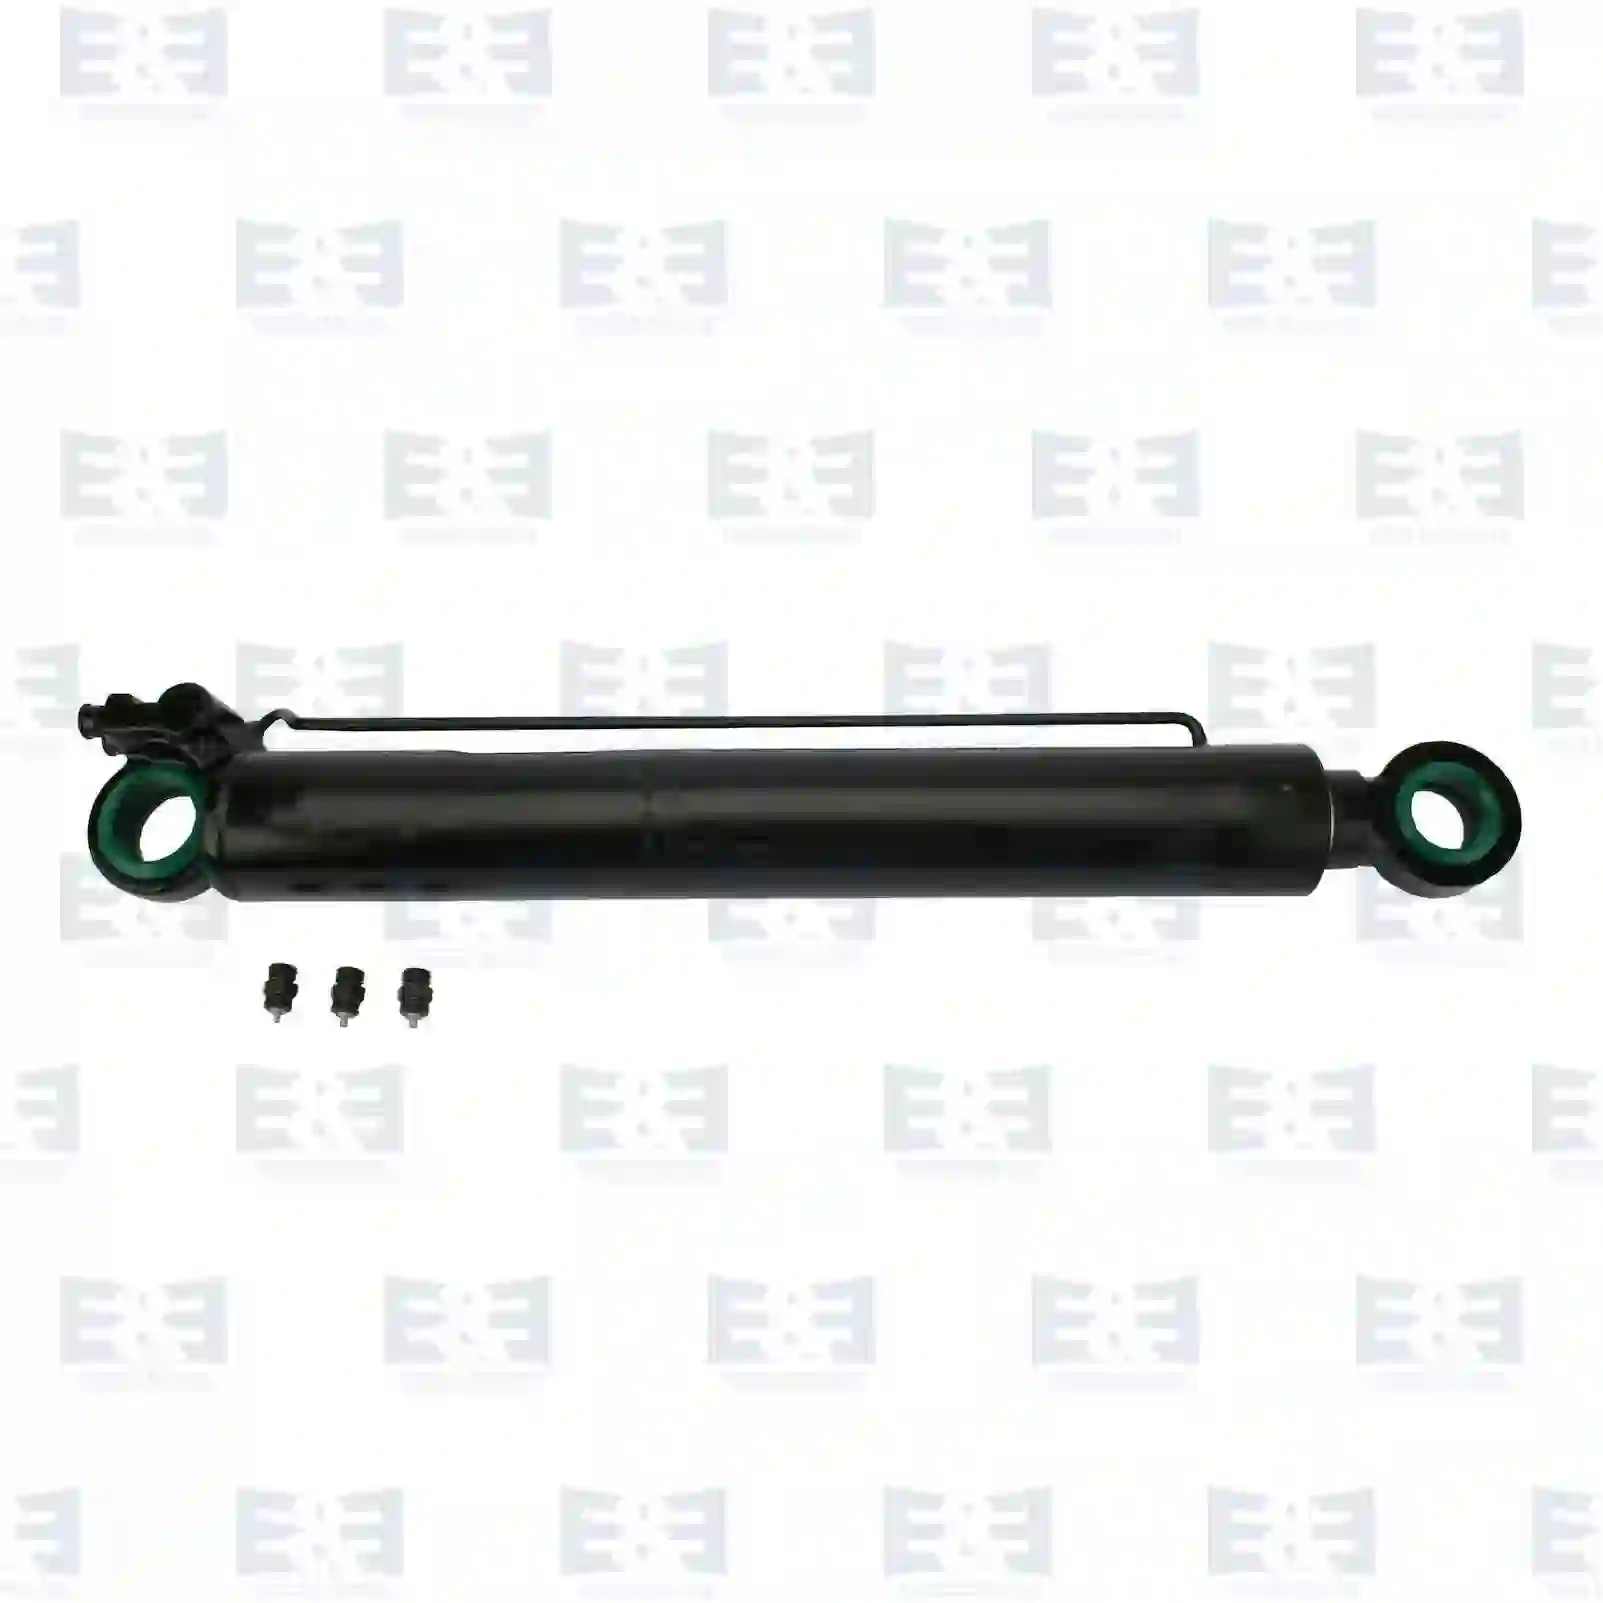  Cabin tilt cylinder, with 3 adapters || E&E Truck Spare Parts | Truck Spare Parts, Auotomotive Spare Parts